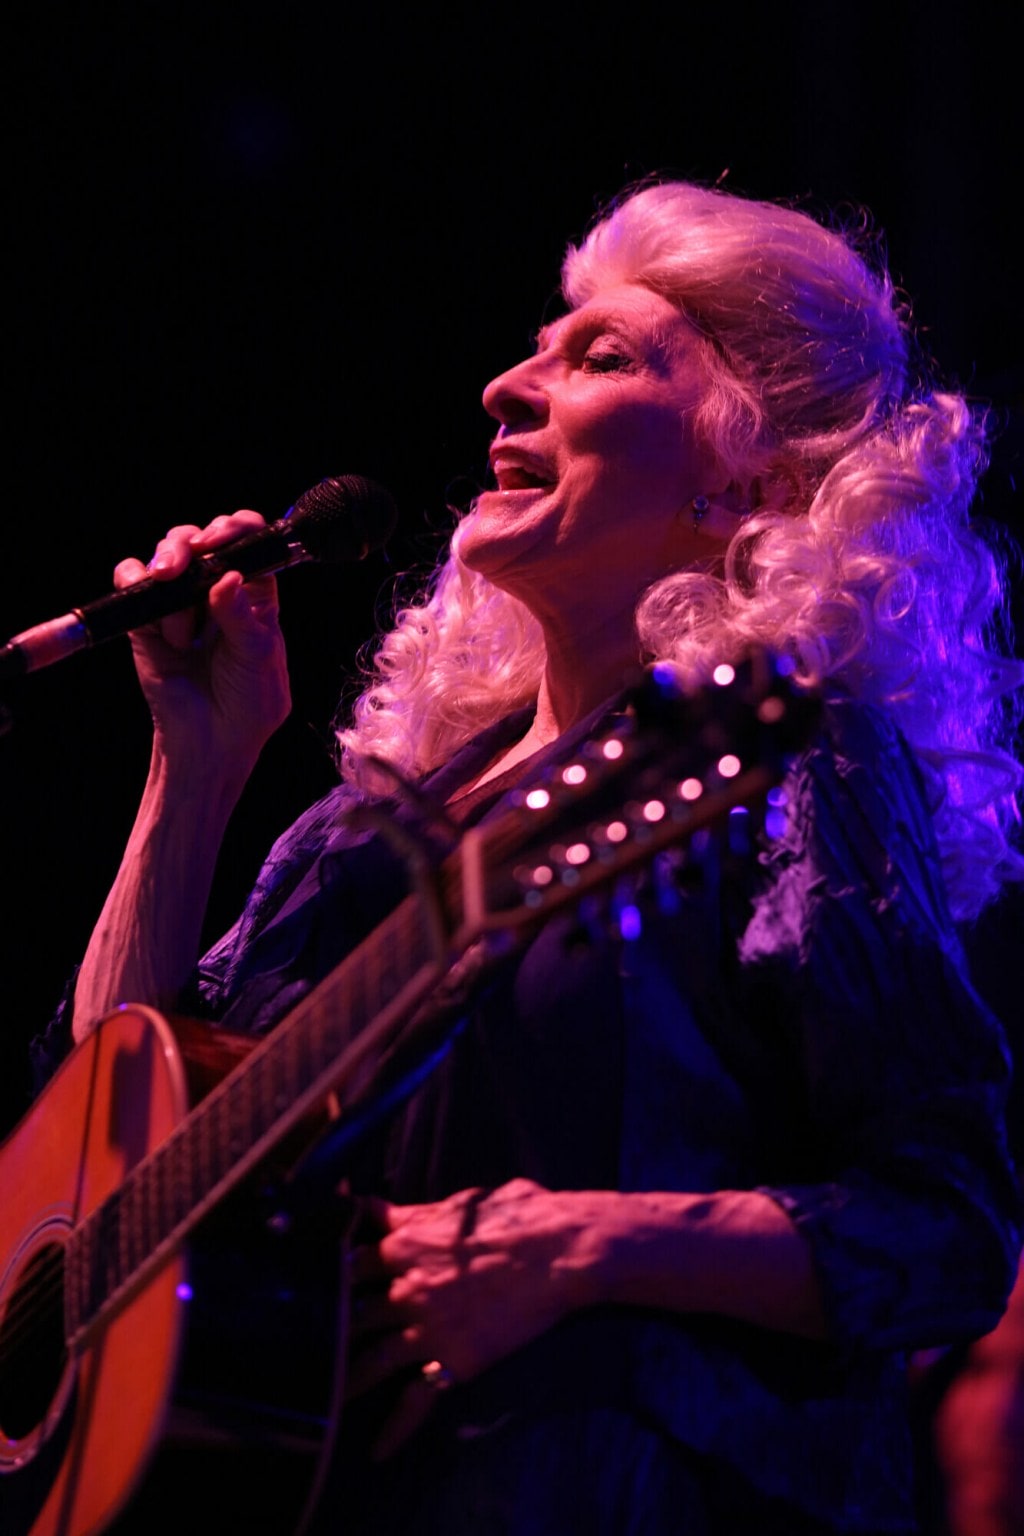 Judy Collins singing into micrphone with guitar